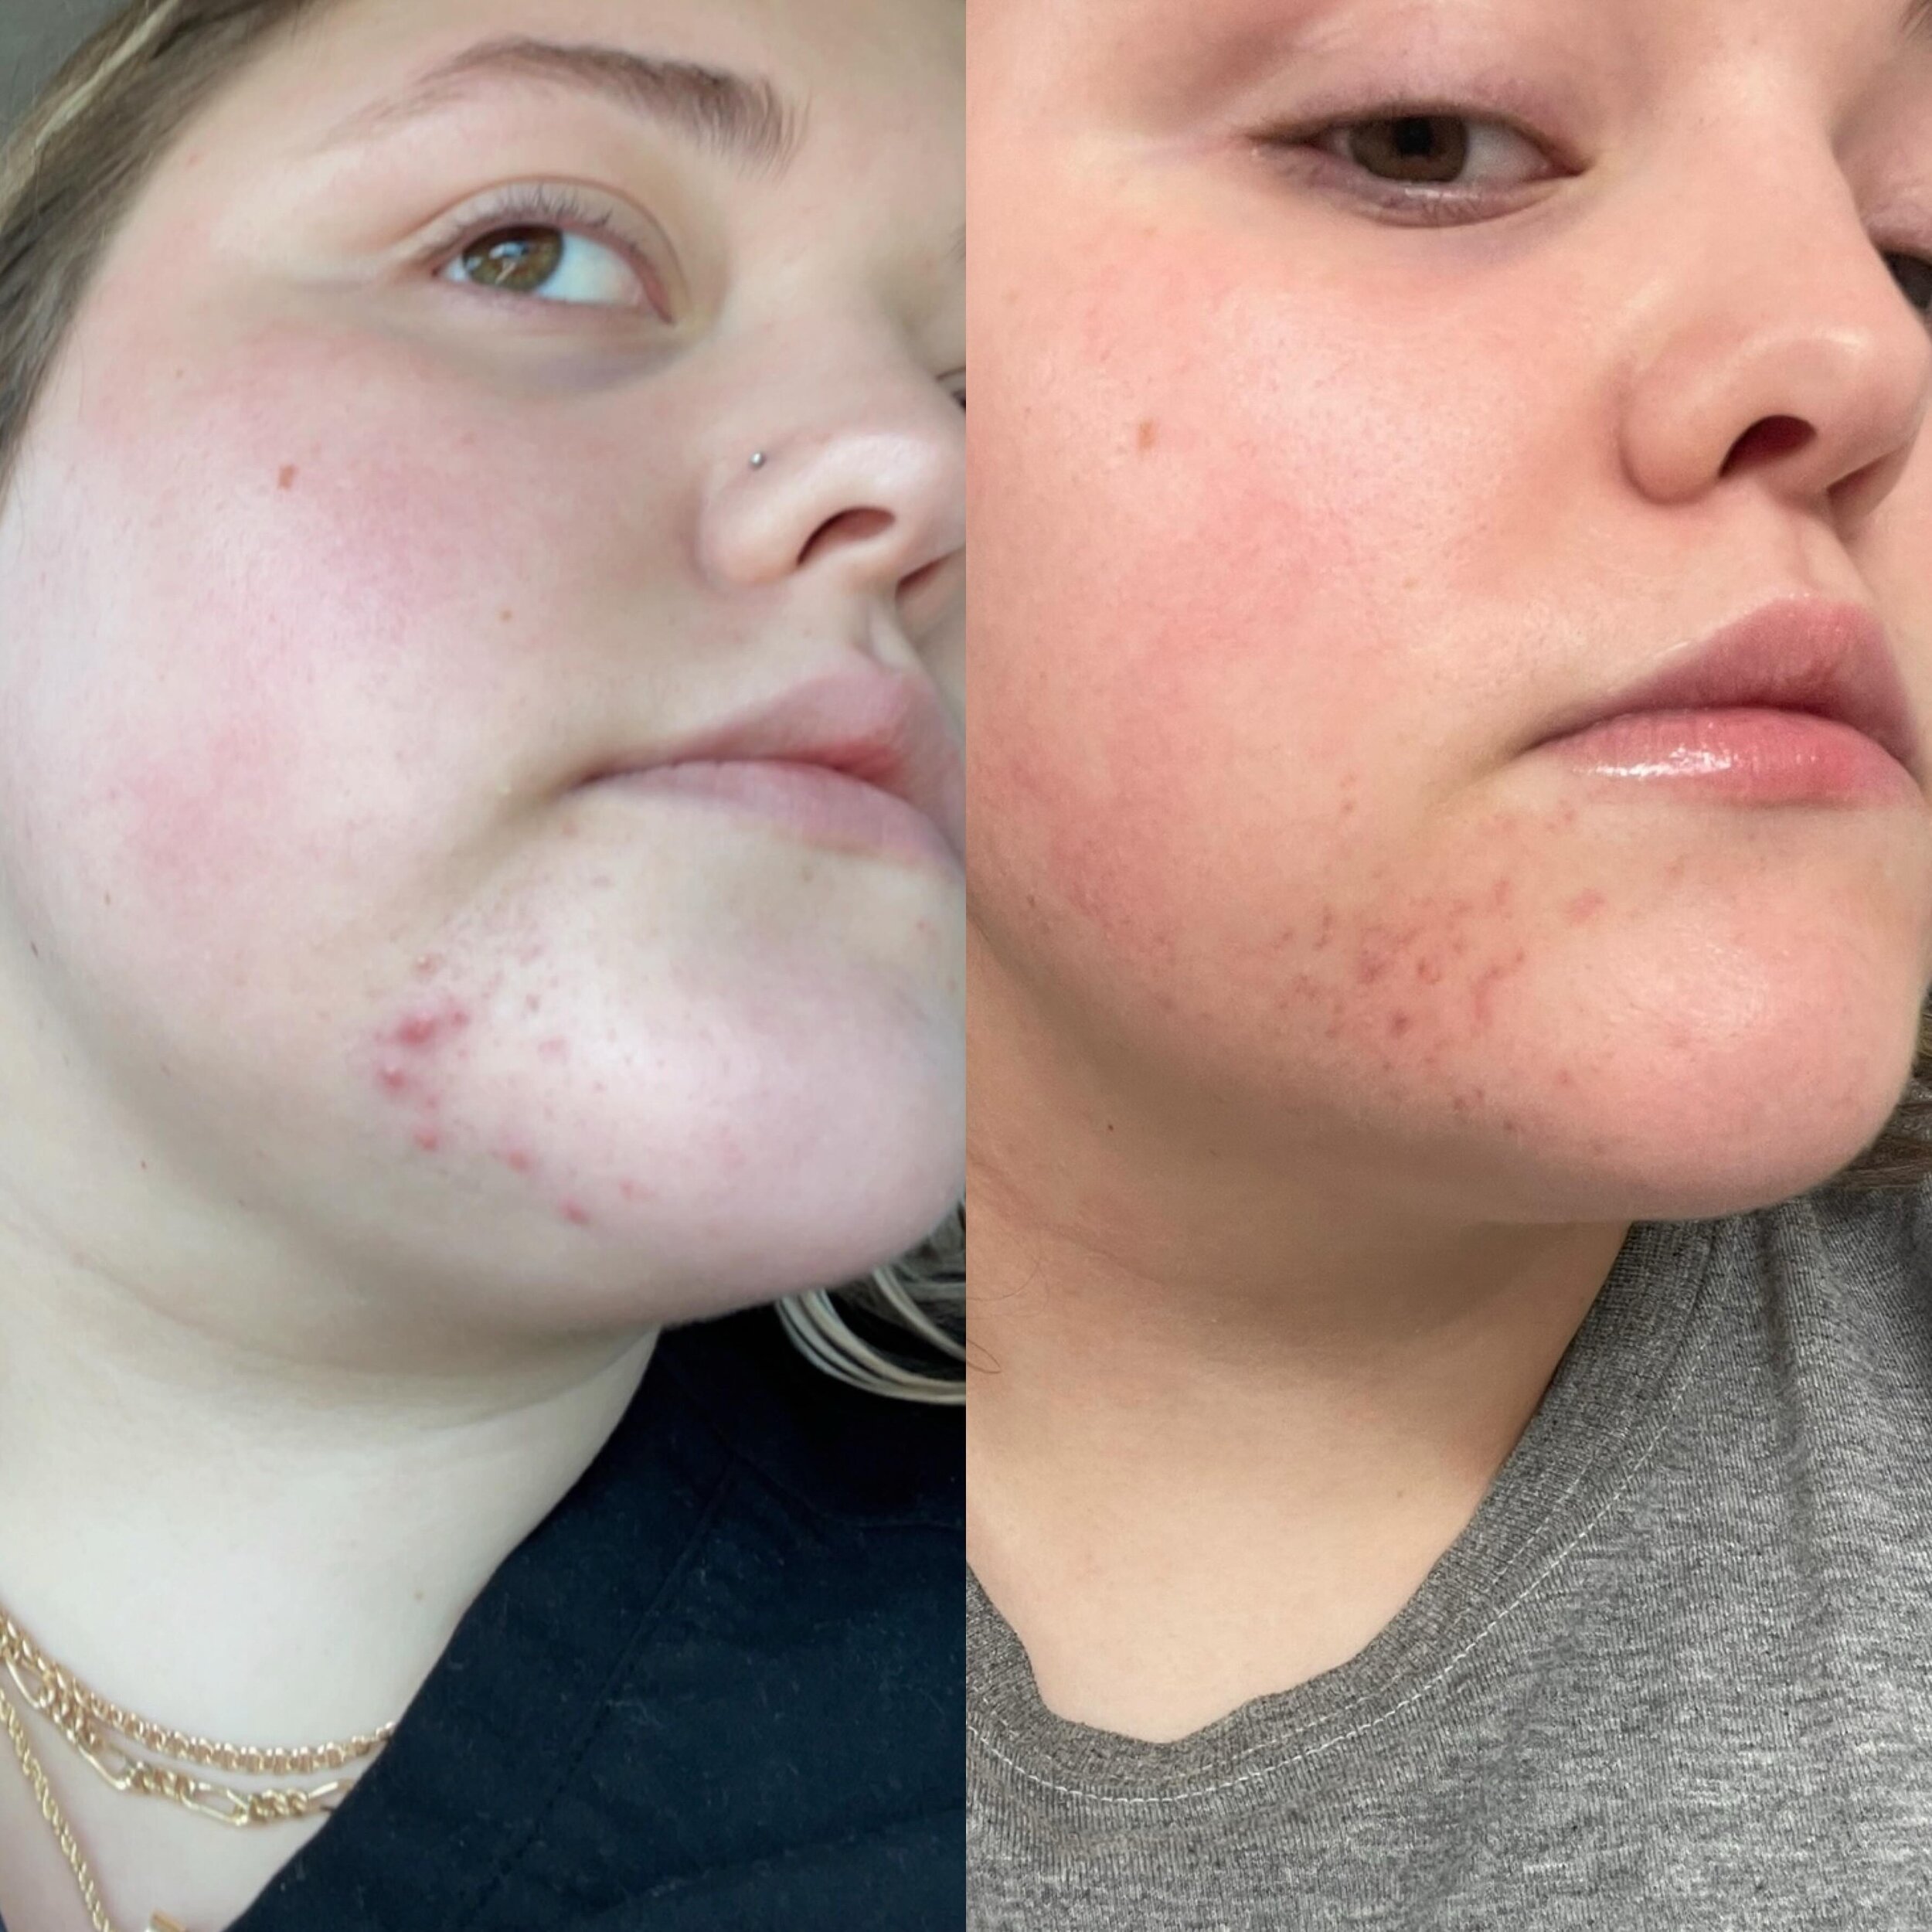 From painful, inflamed acne to PIE and no active breakouts In 2 months ❤️ 

I have struggled with my skin for over a decade now. I get horrible hormonal breakouts and they hurt like a biotch. I&rsquo;m also a picker which is where most of the redness